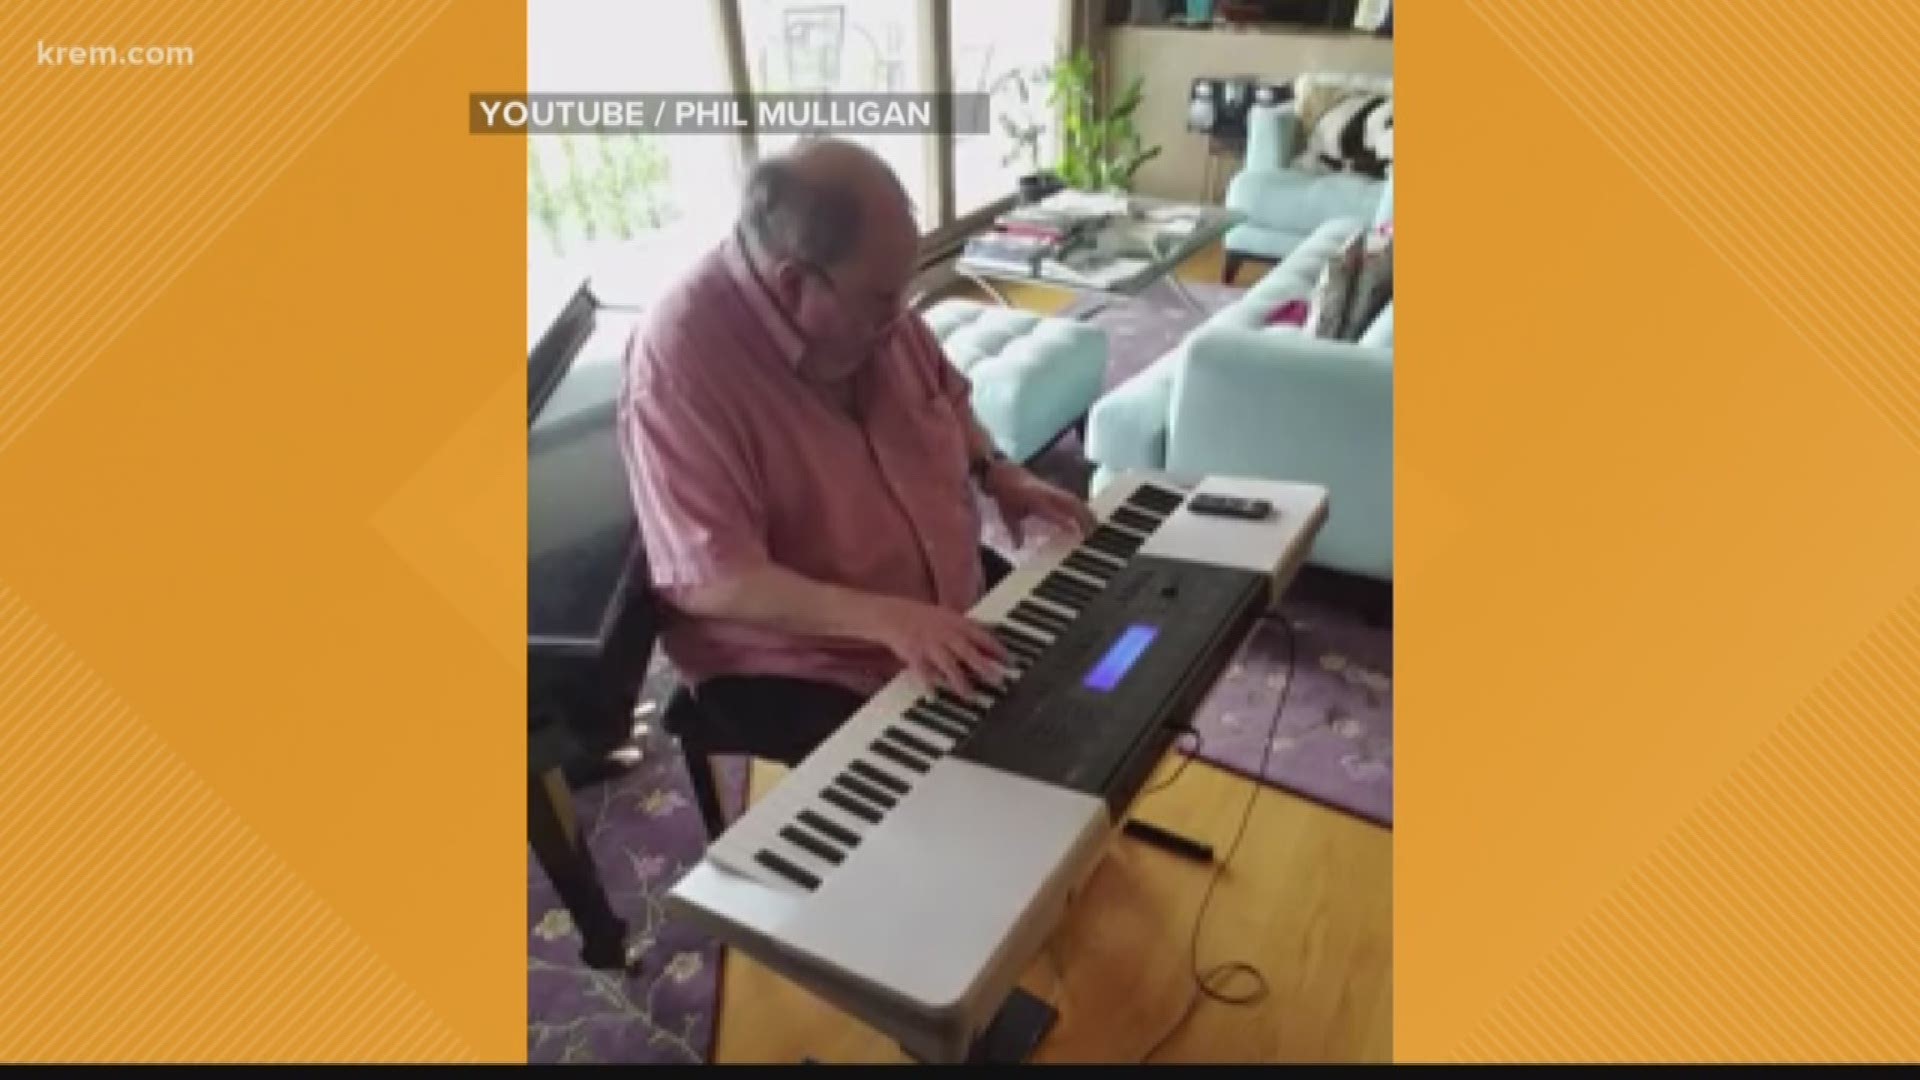 We want to share this performance from our viewer Philip. He says he wanted to play his piano to help everyone have a peace of mind.